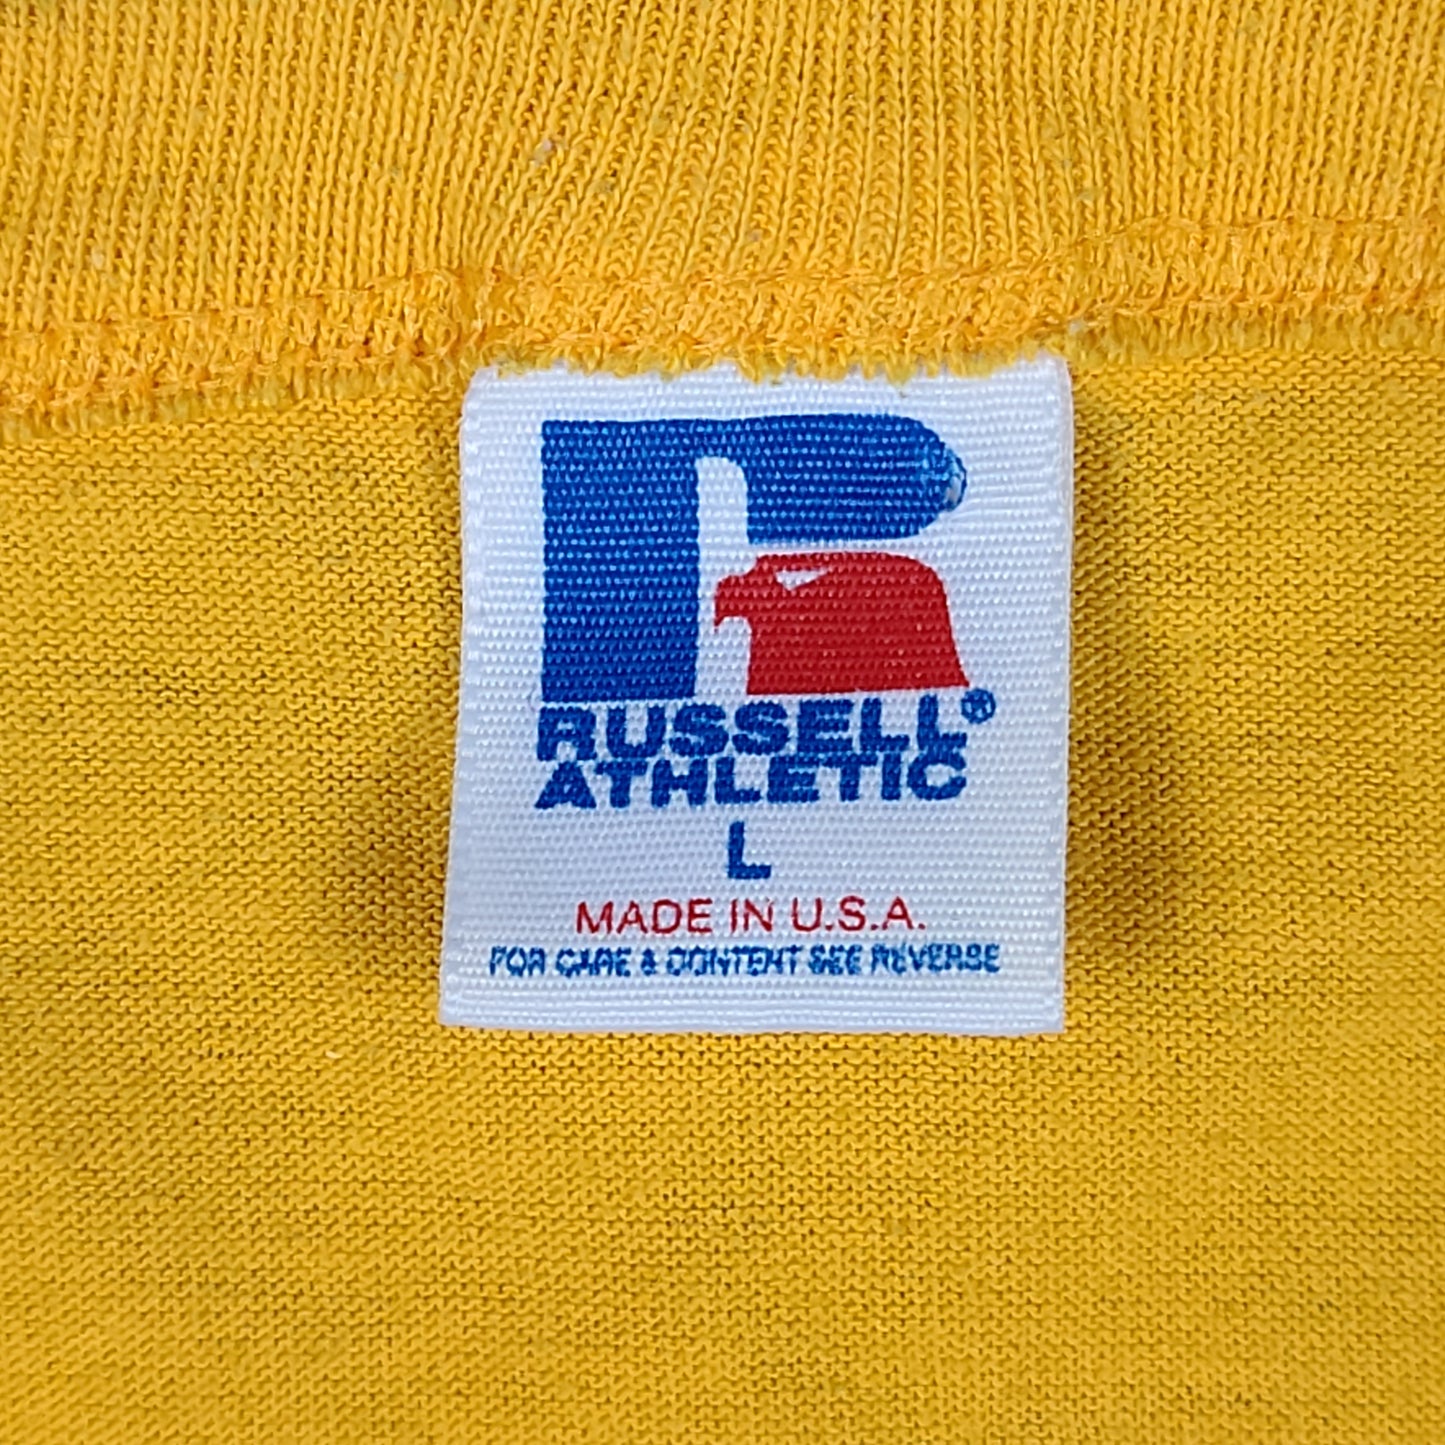 Vintage YMCA Basketball Yellow Russell Athletic Tee